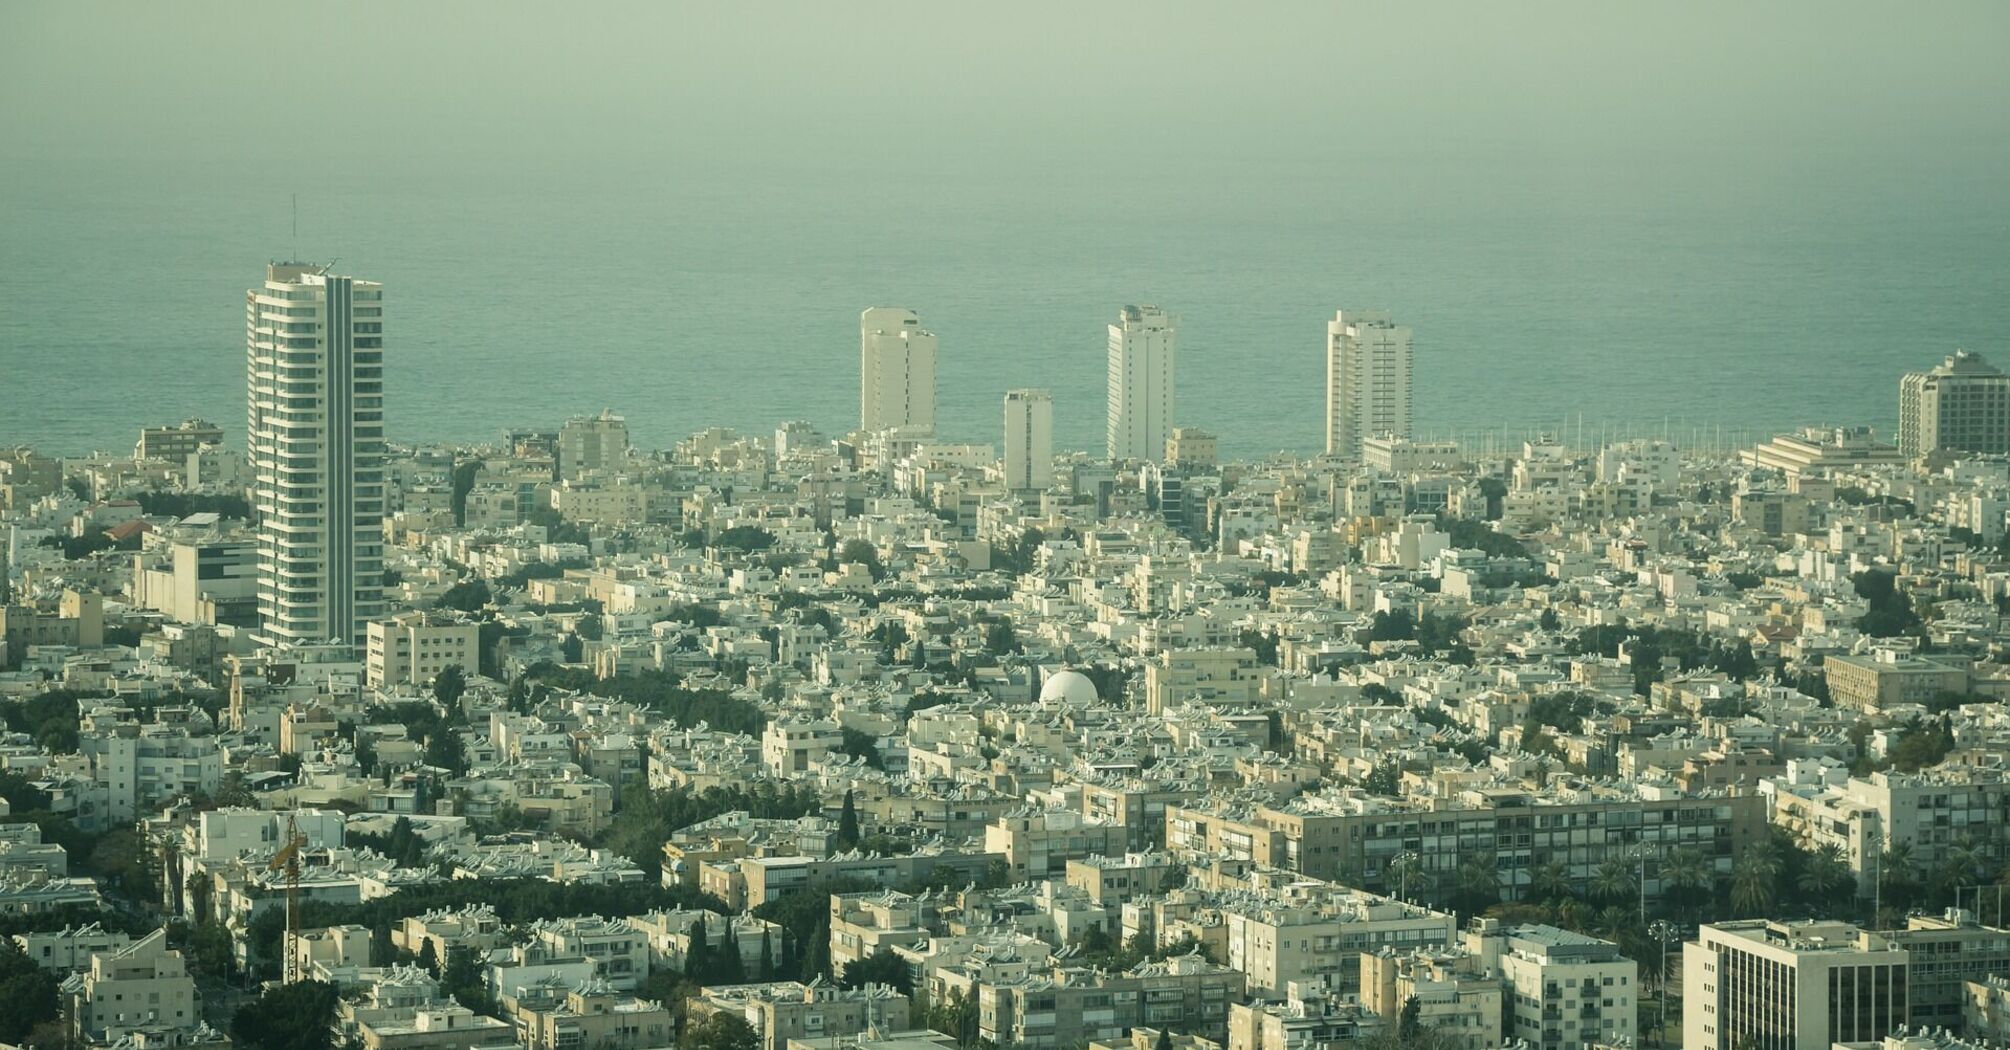 Aerial view of Tel Aviv cityscape with high-rise buildings and the Mediterranean Sea in the distance